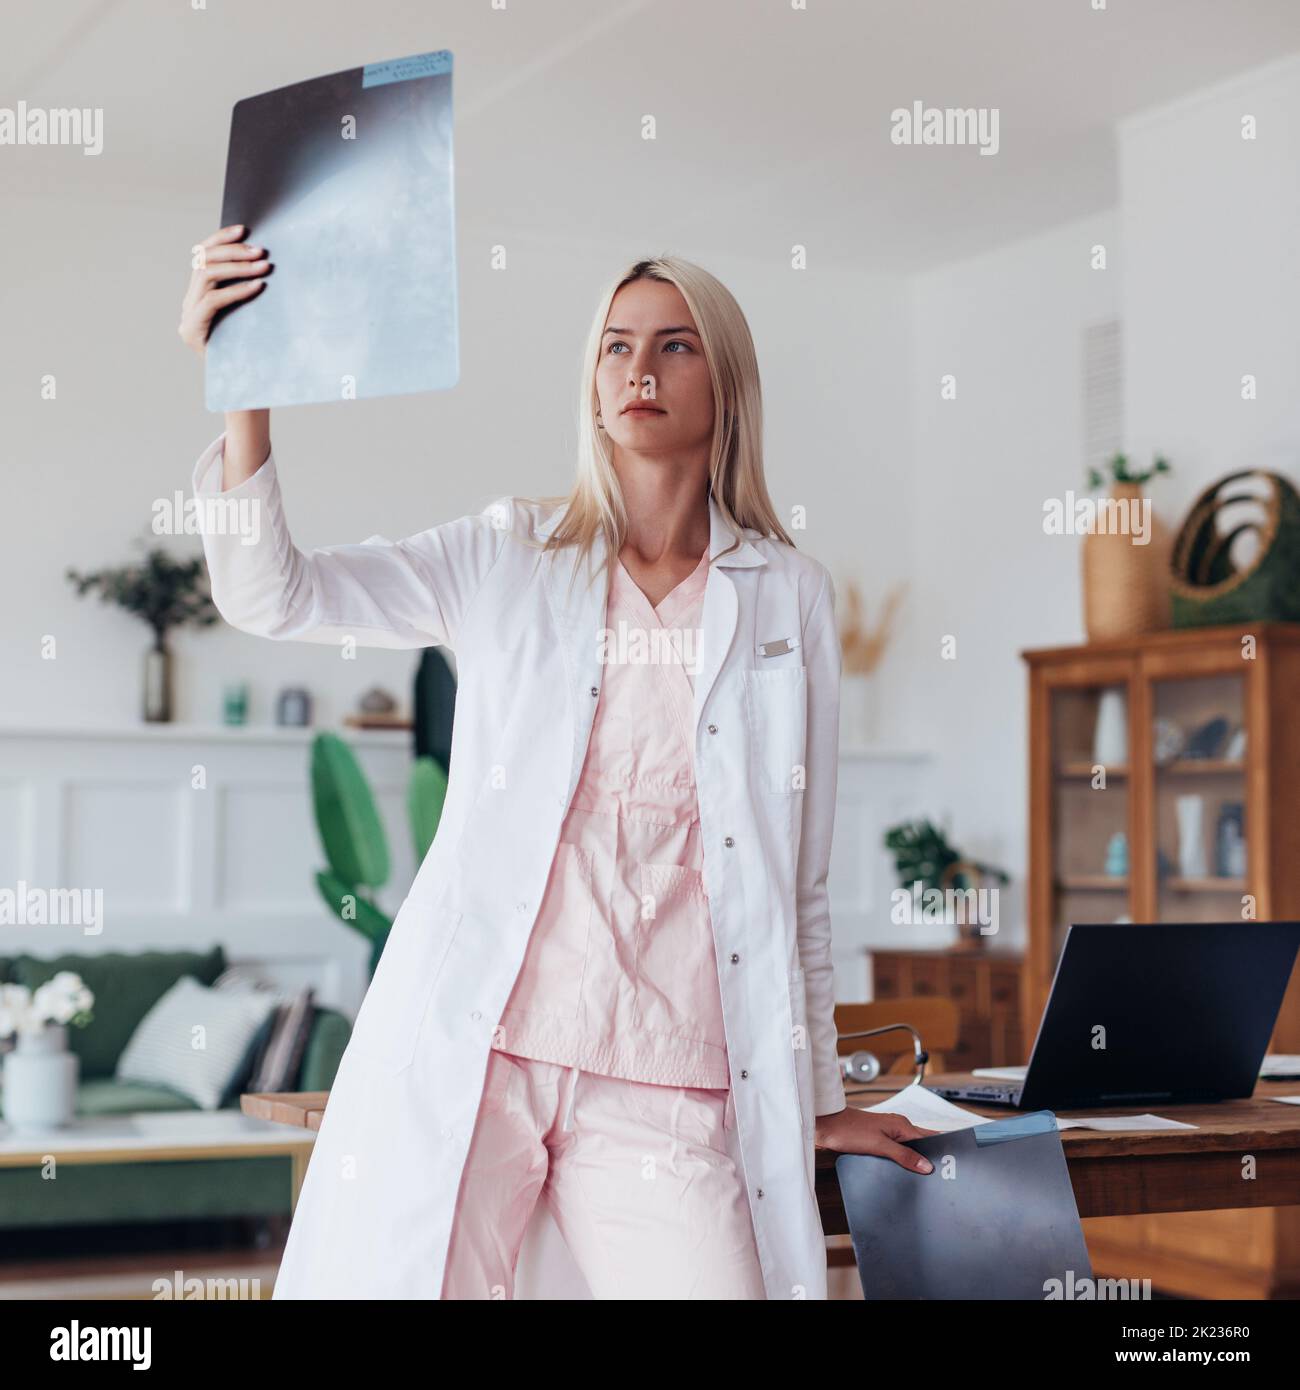 Woman doctor looking at an X-ray image in the office. Stock Photo